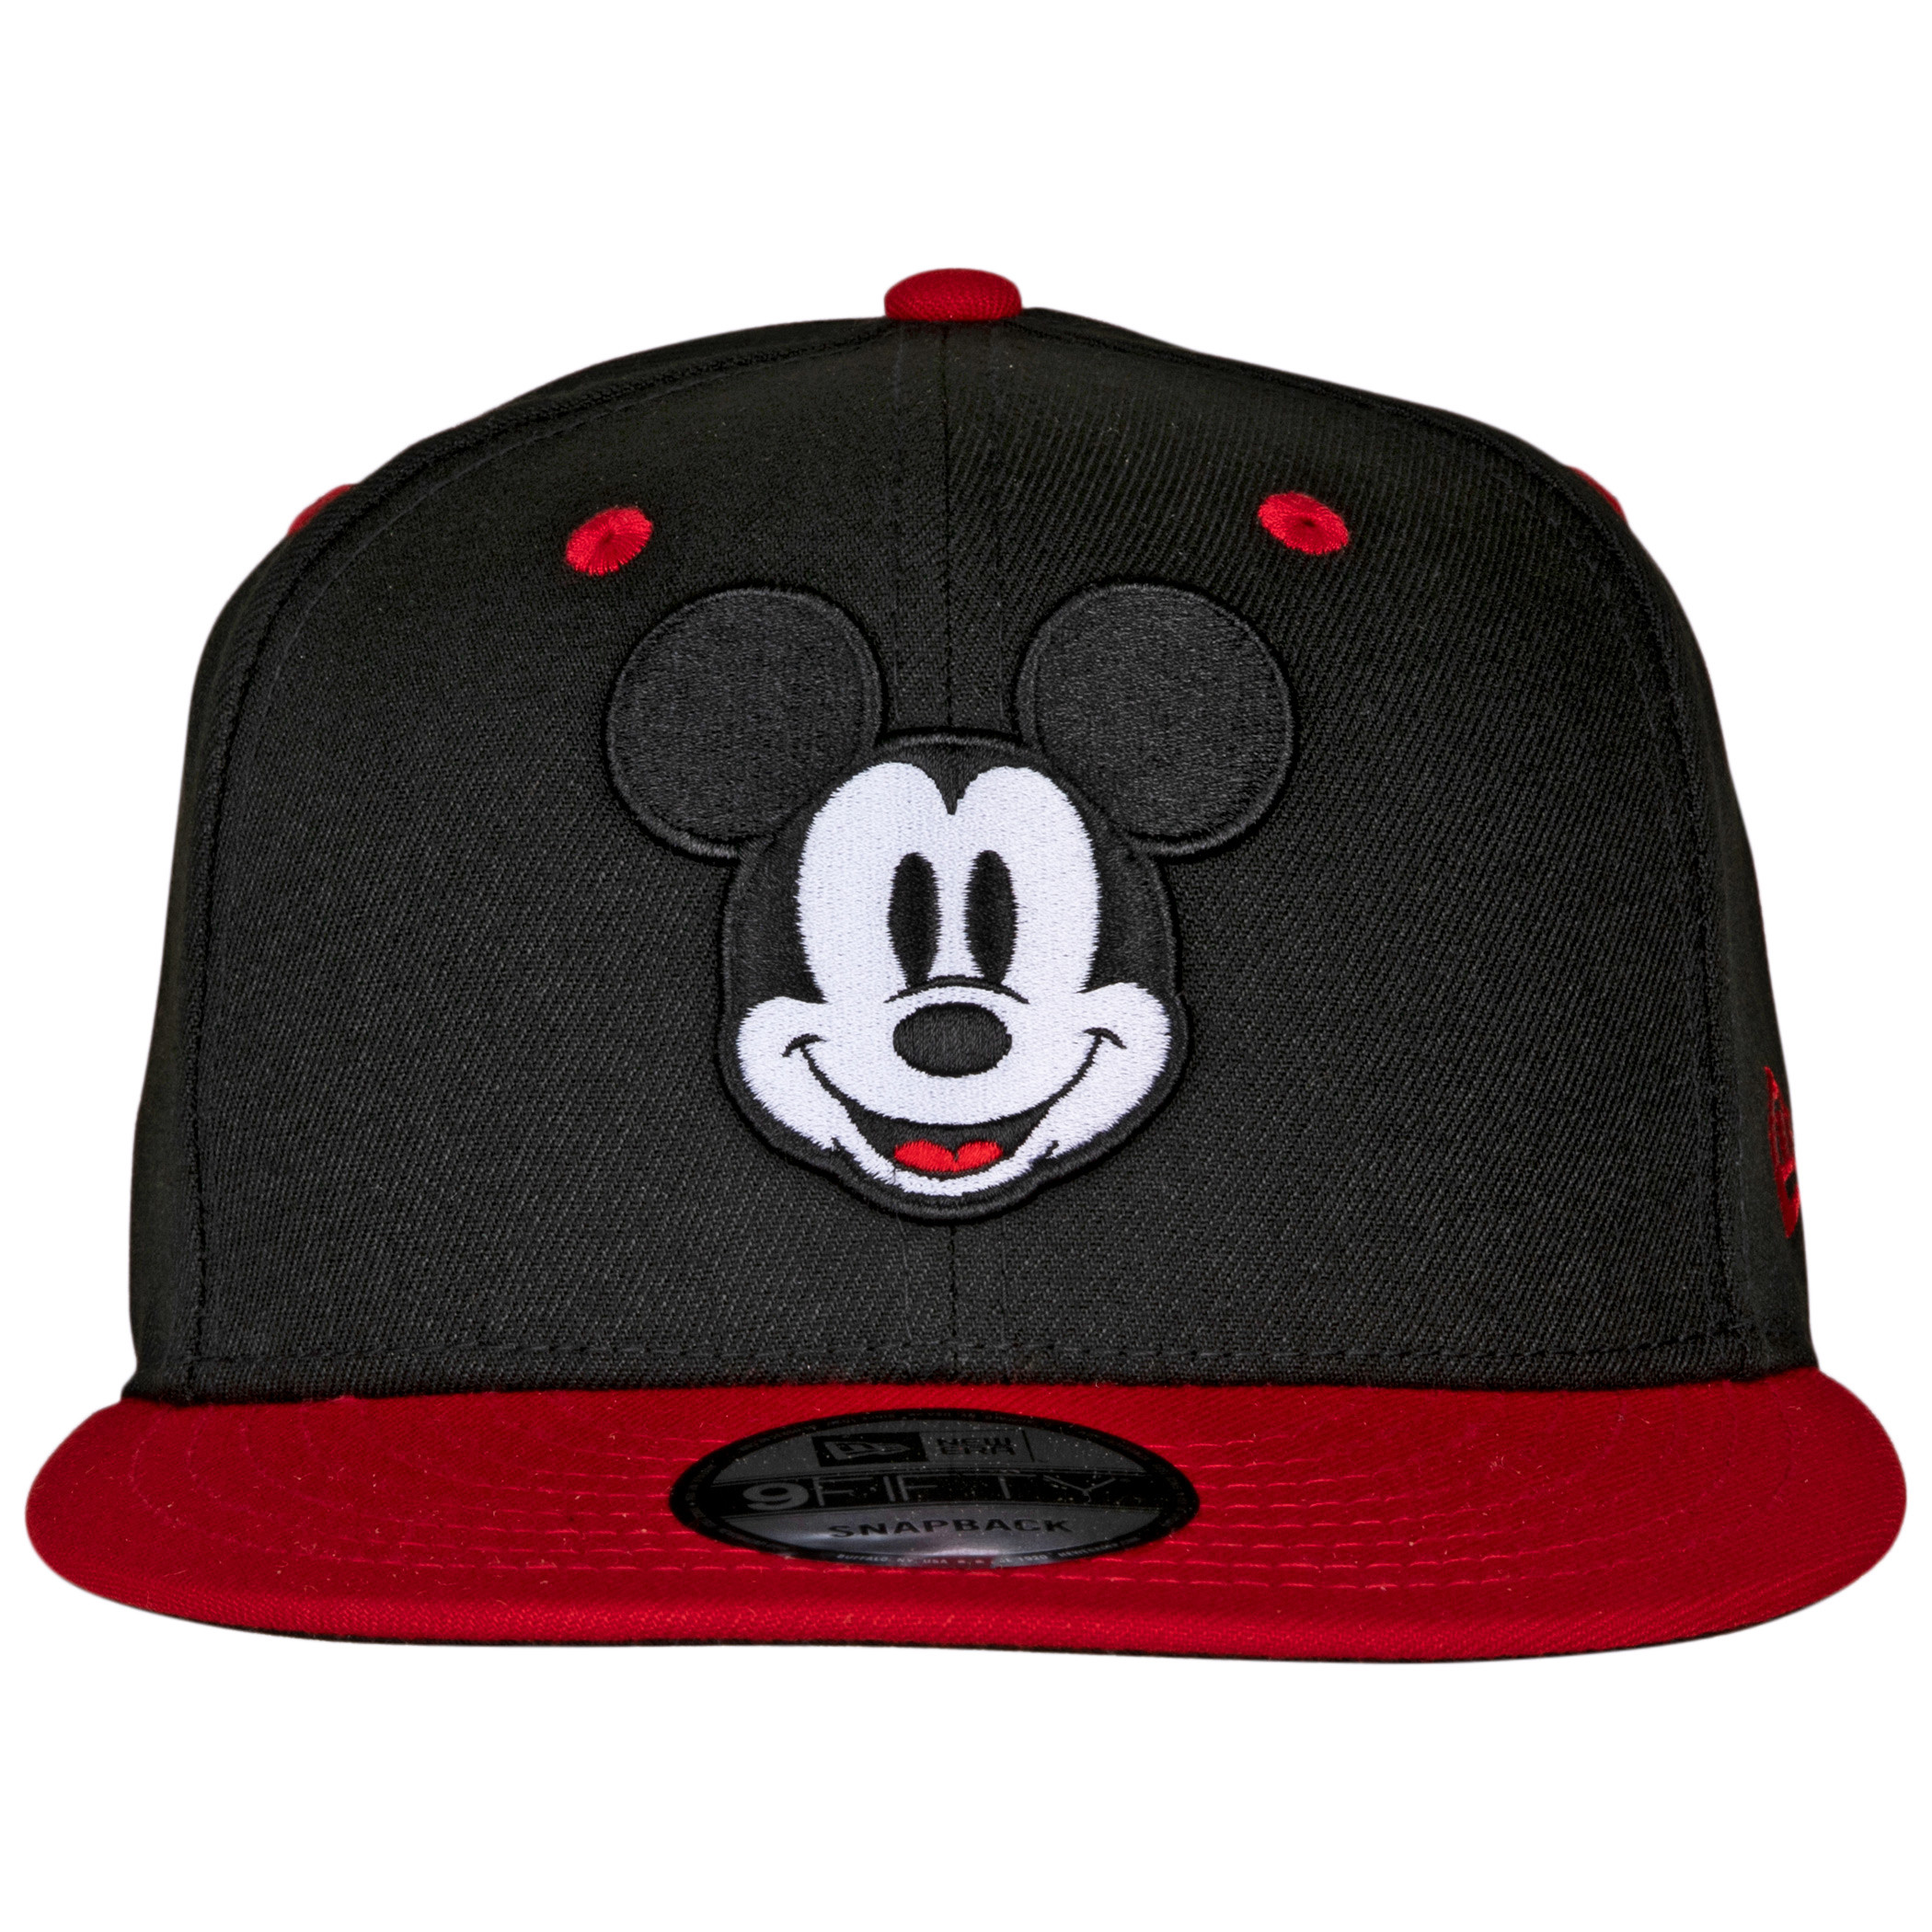 Mickey Mouse Classic Head Logo New Era 9Fifty Adjustable Hat